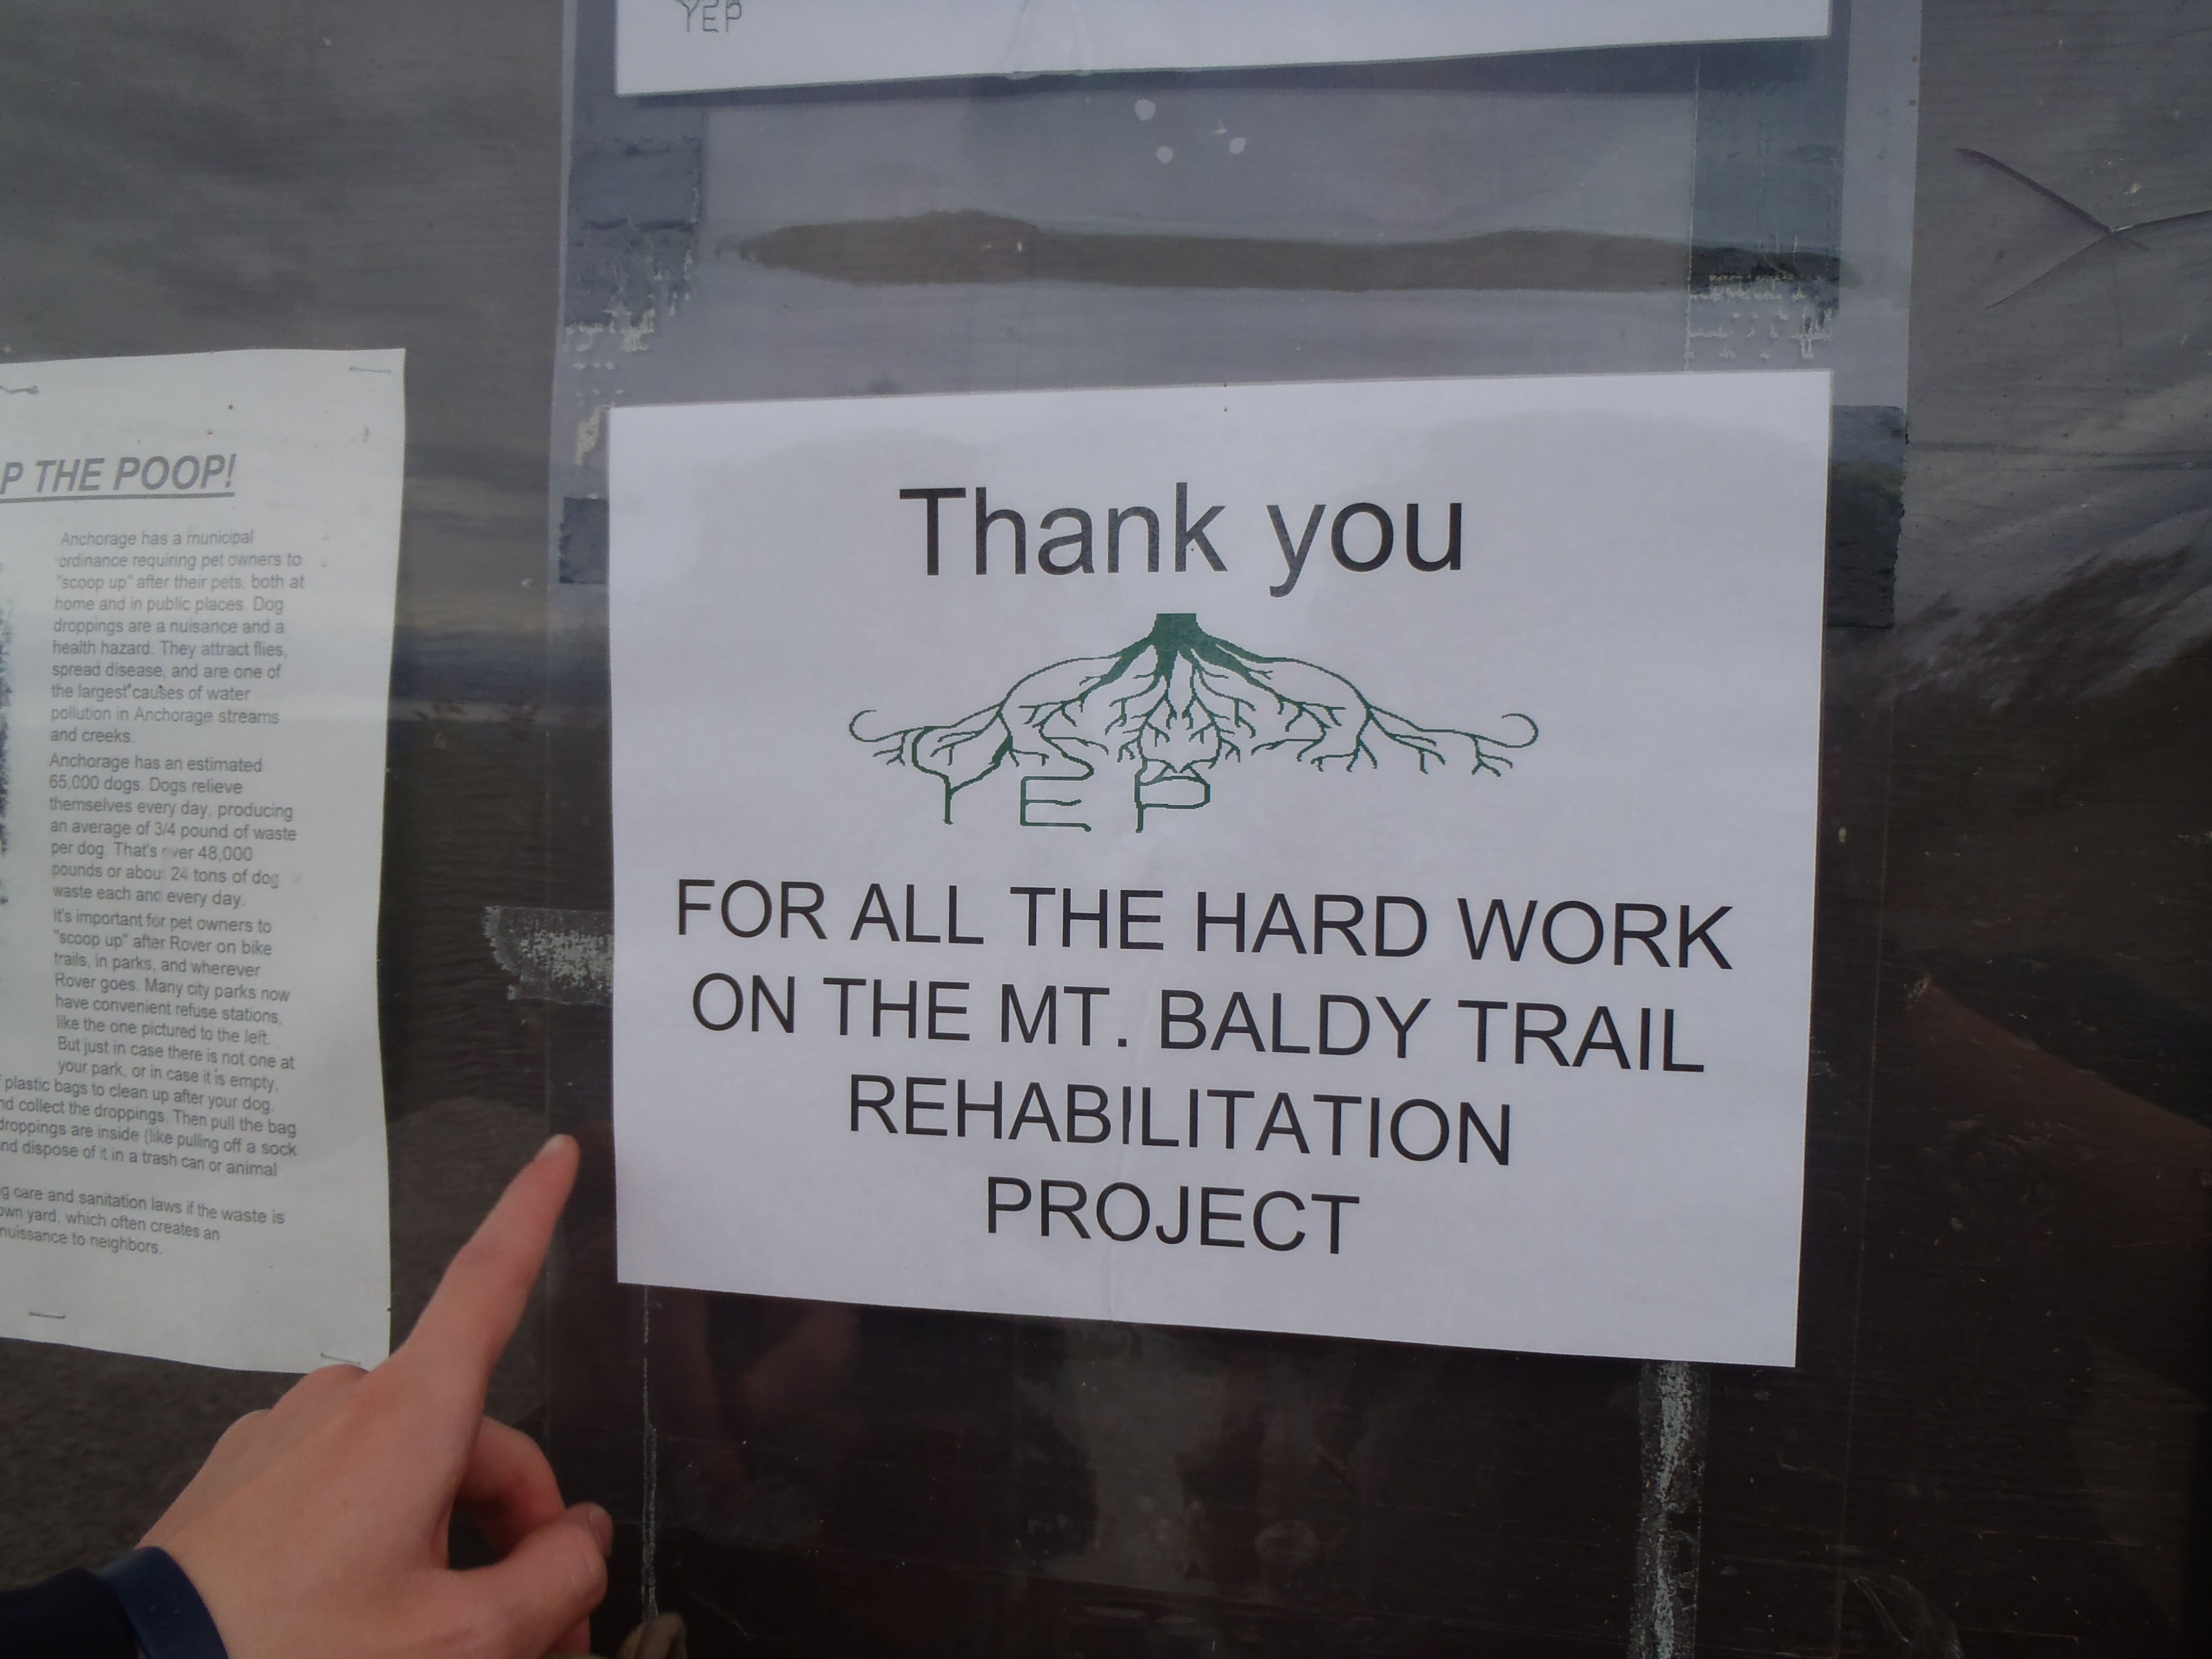 Sign that reads: "Thank you for all the hard work on the Mt. Baldy rehabilitation project"